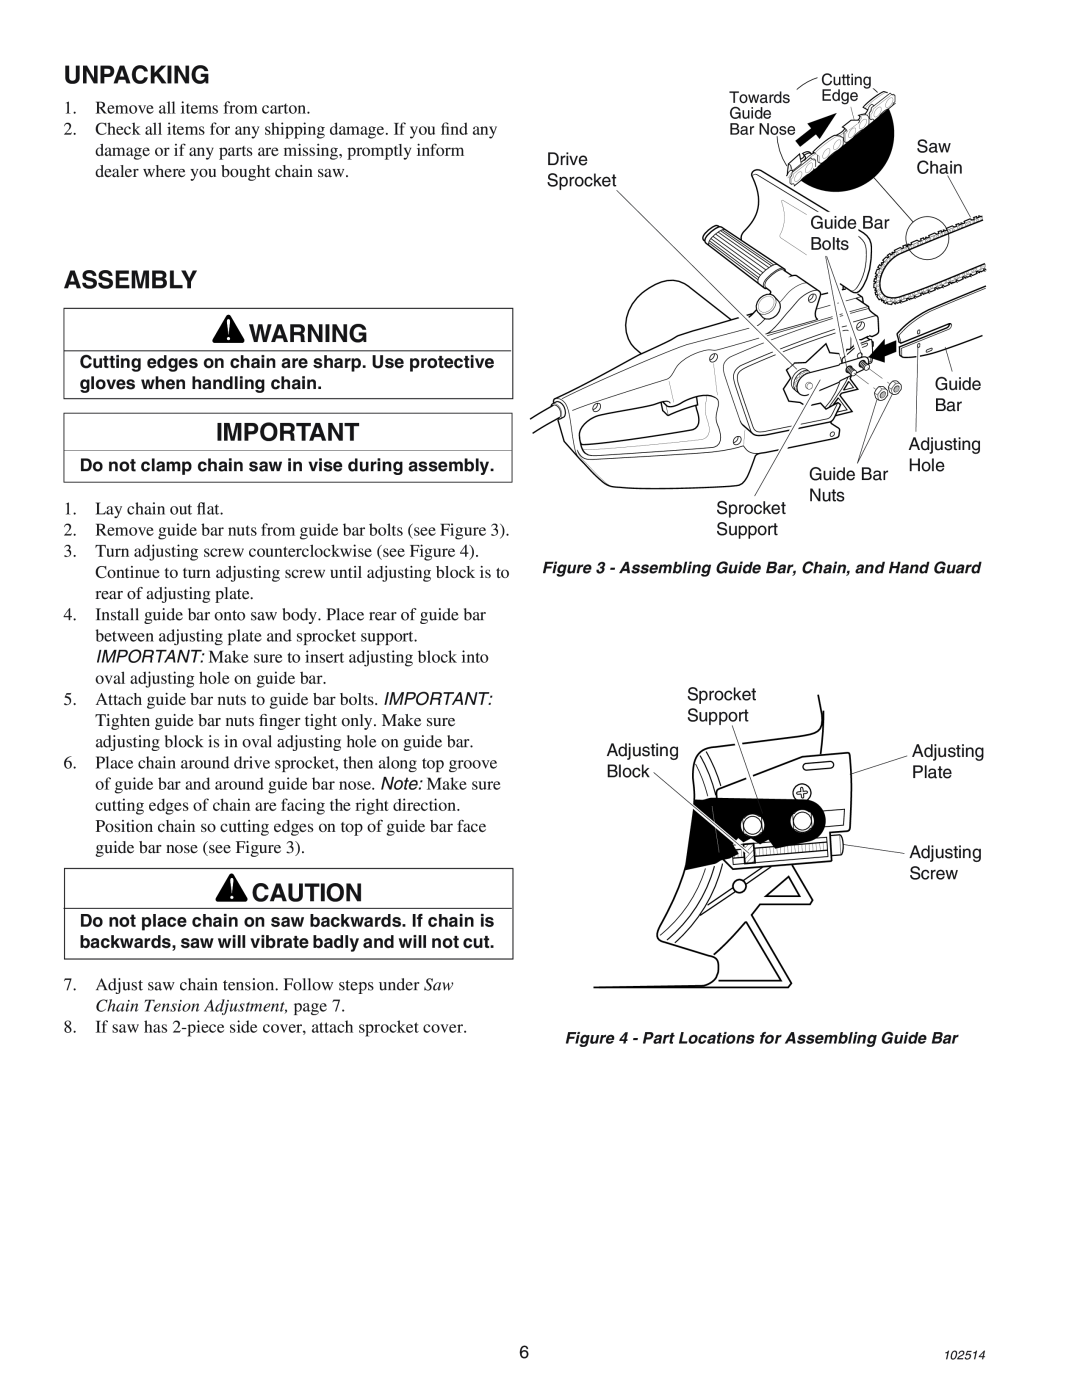 Echo ECS-2000 manual Unpacking, Assembly, Do not clamp chain saw in vise during assembly 